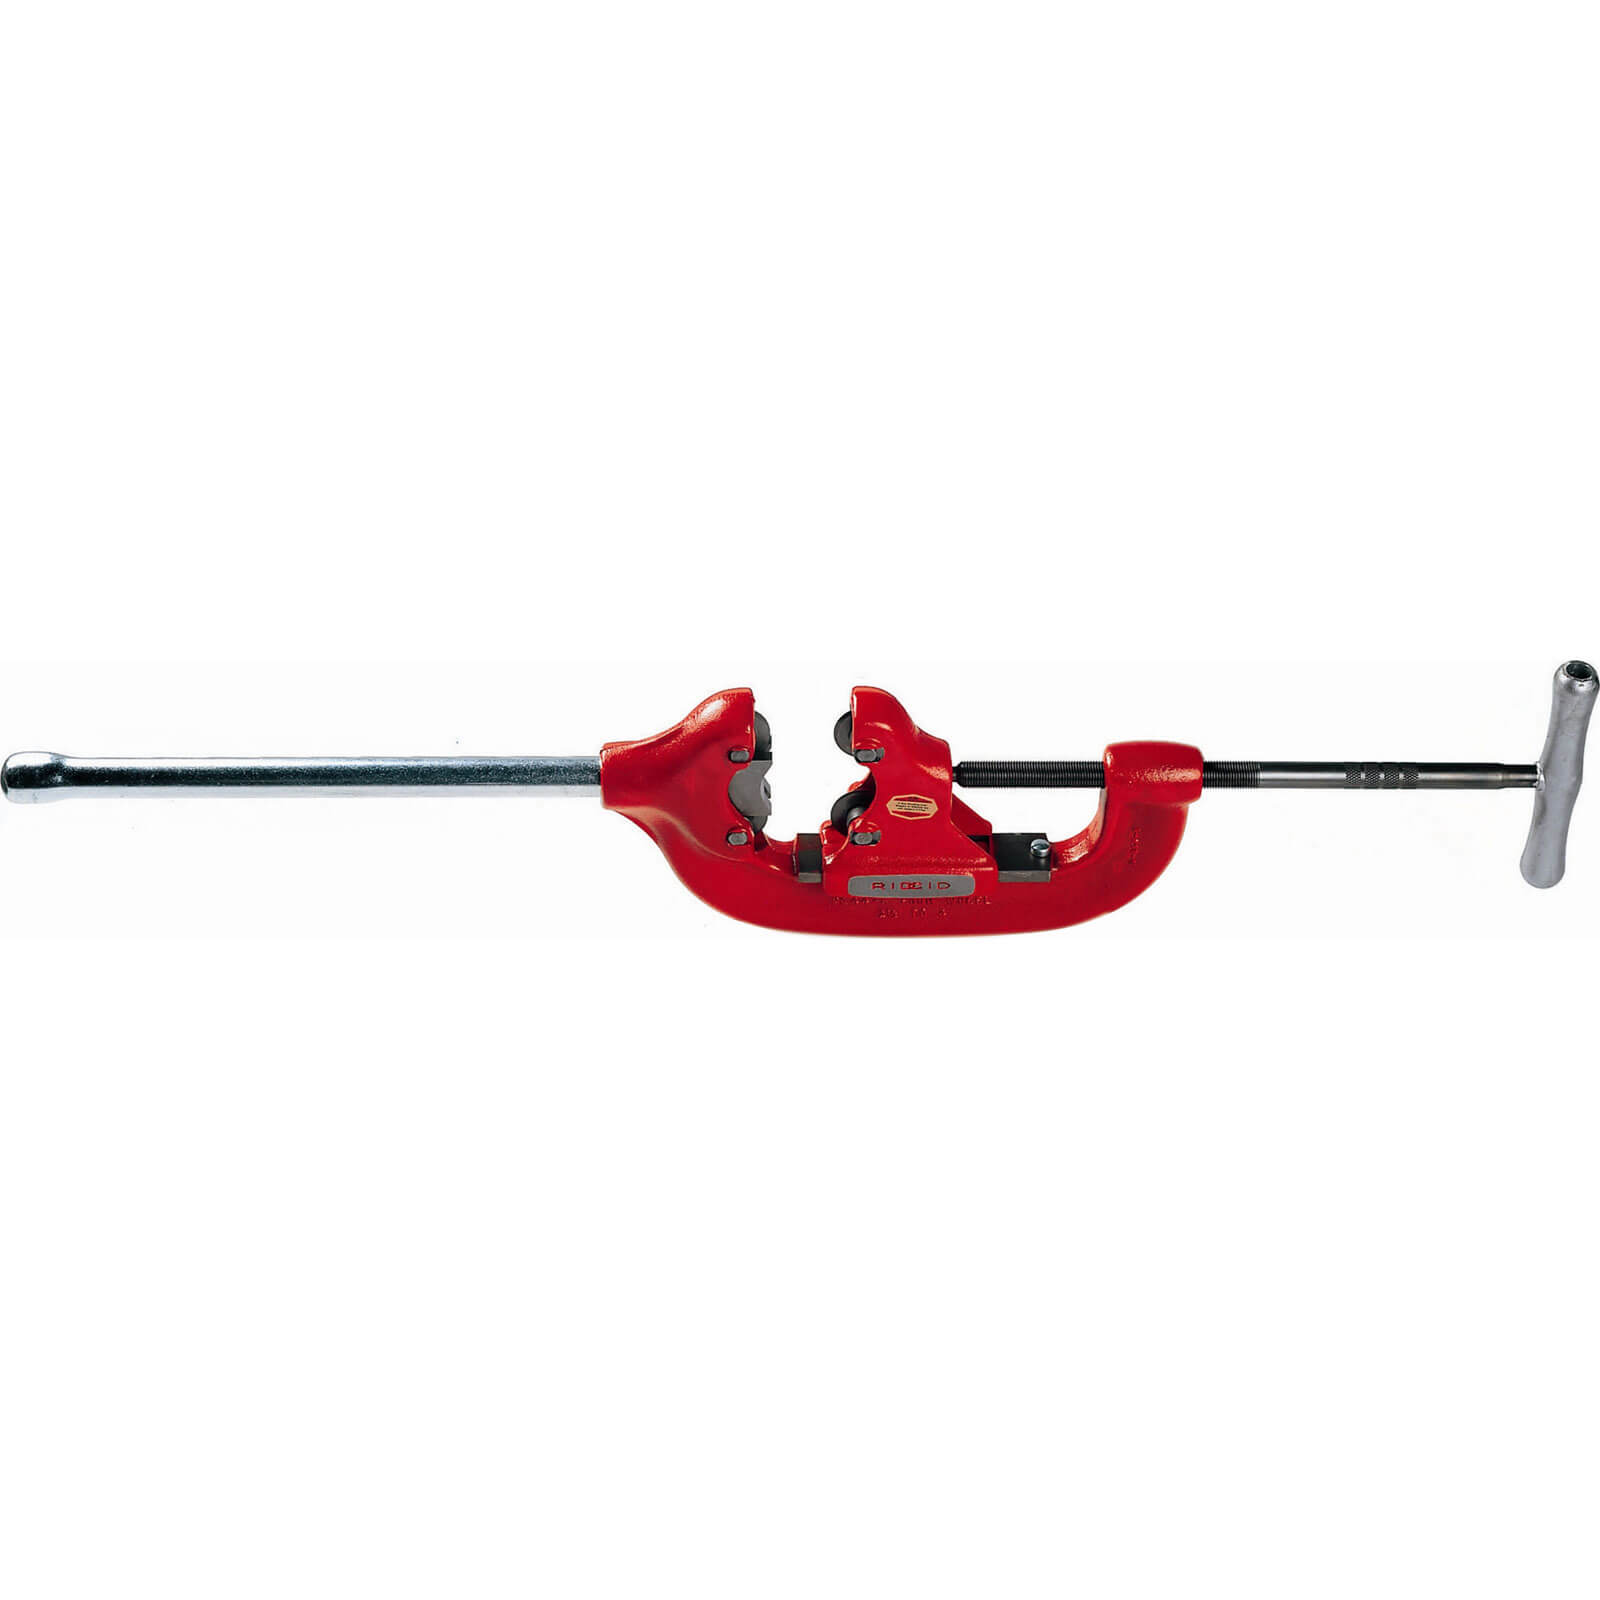 Image of Ridgid 2 Handle Heavy Duty Adjustable Pipe Cutter 65mm - 100mm